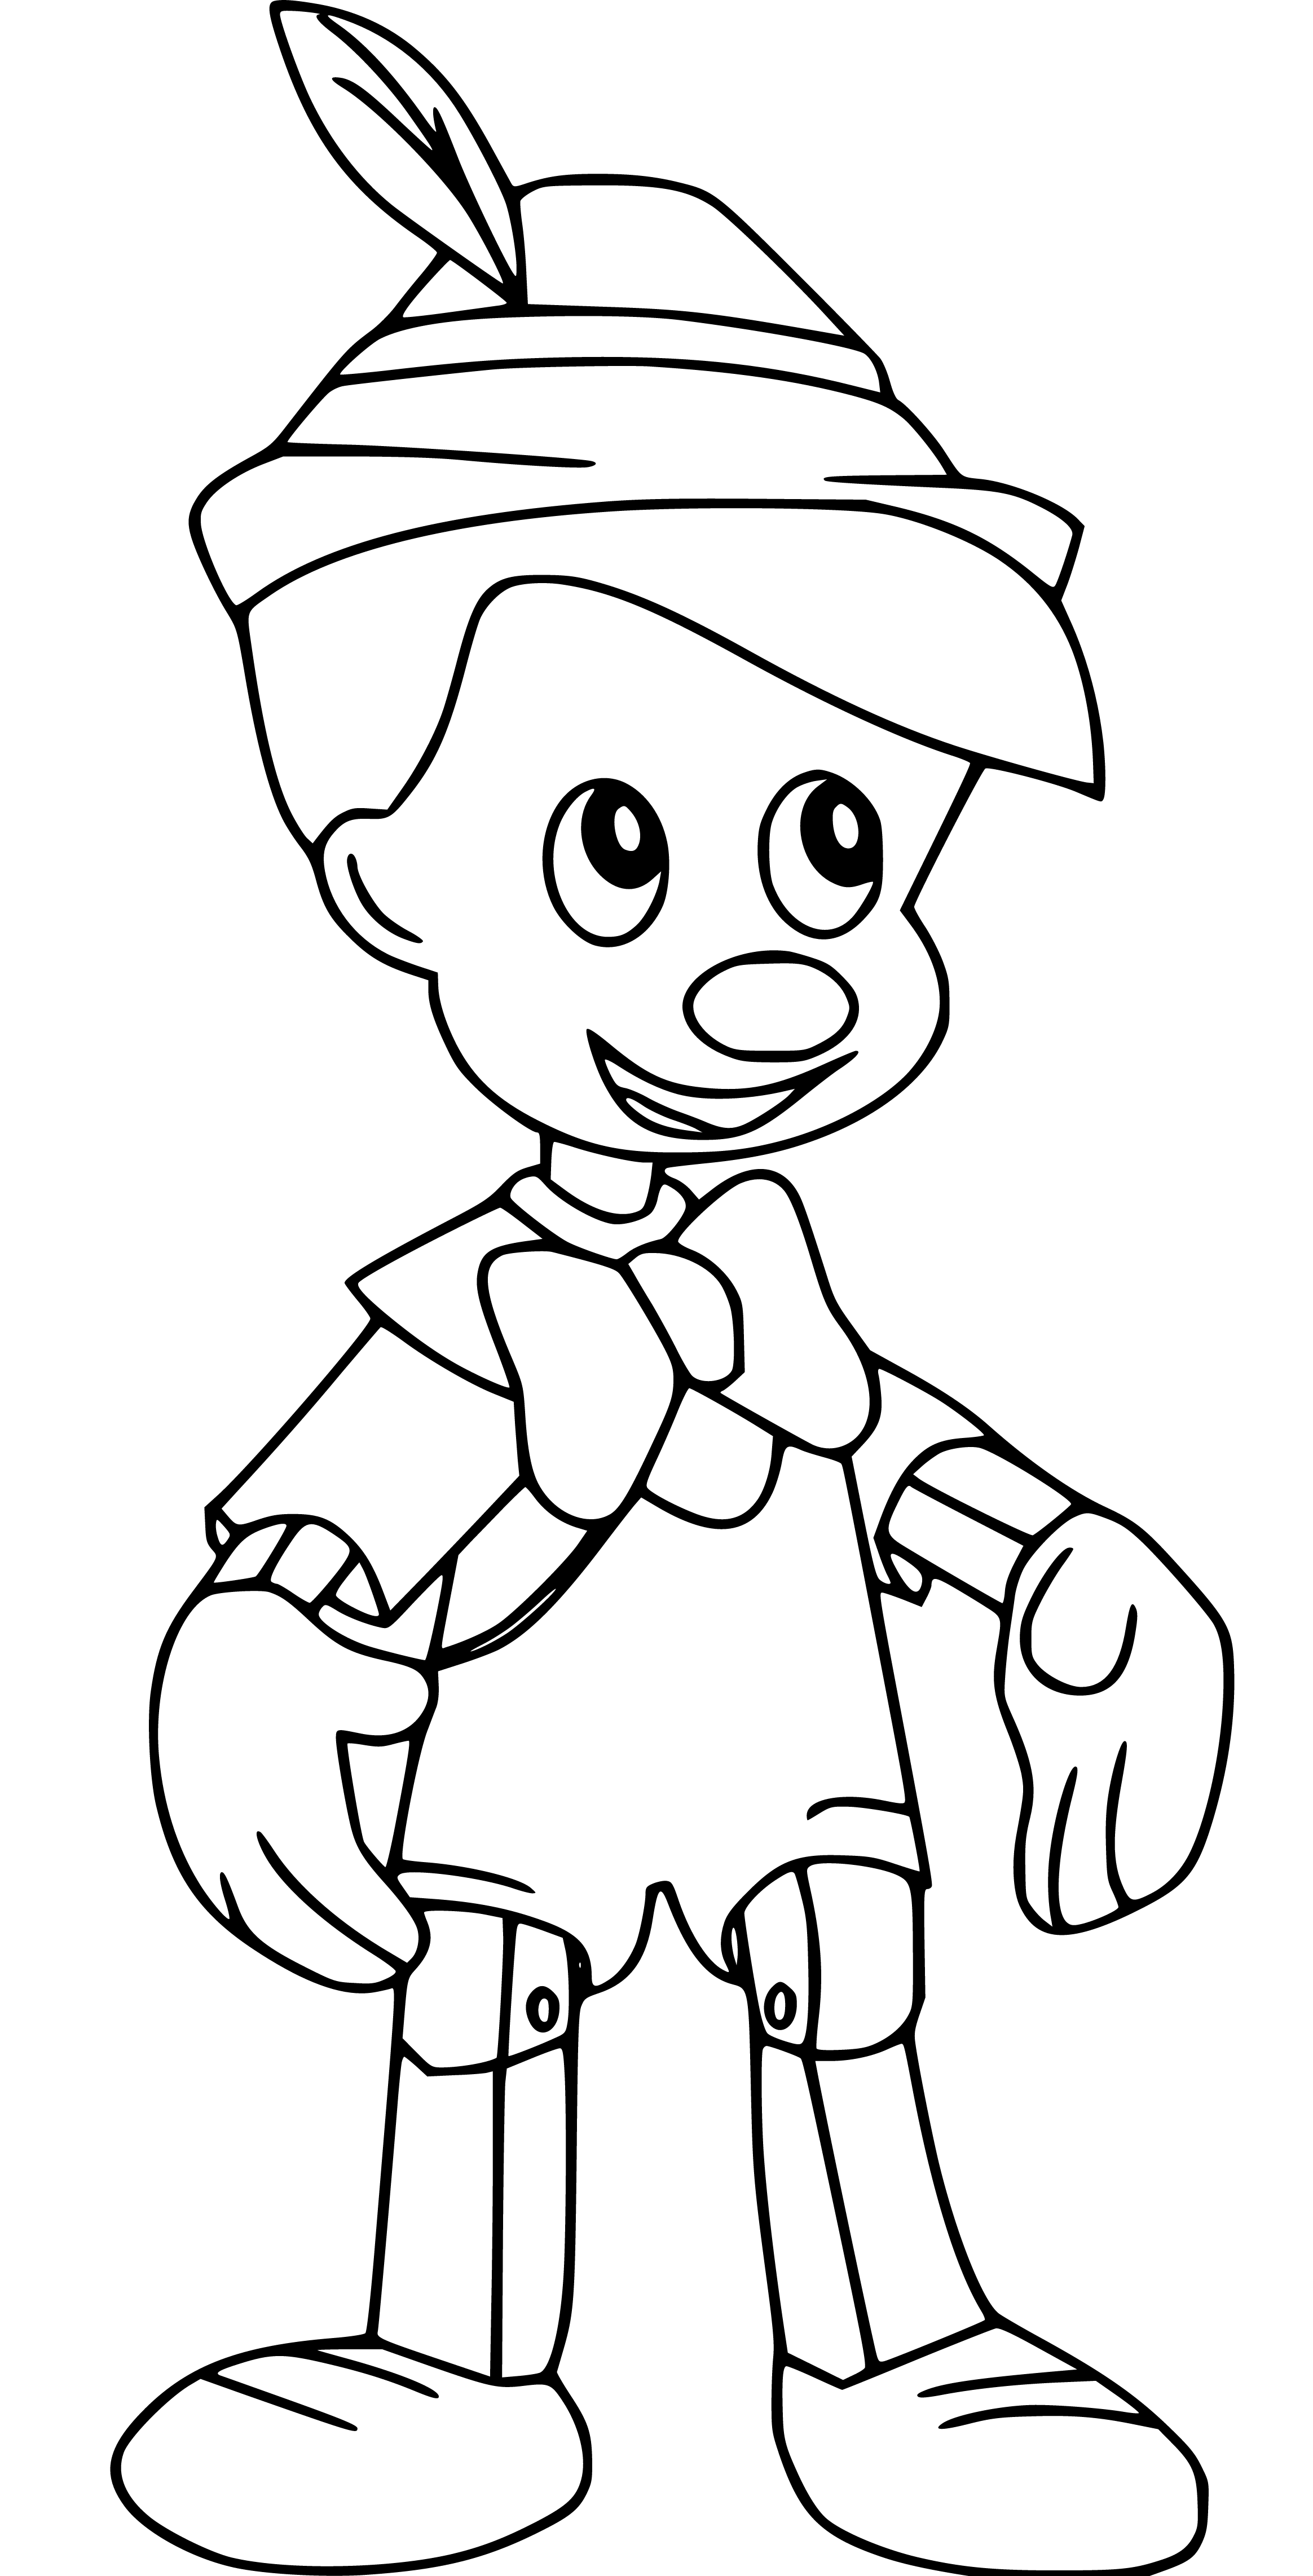 Easy Pinocchio Coloring Page simple for kids - SheetalColor.com